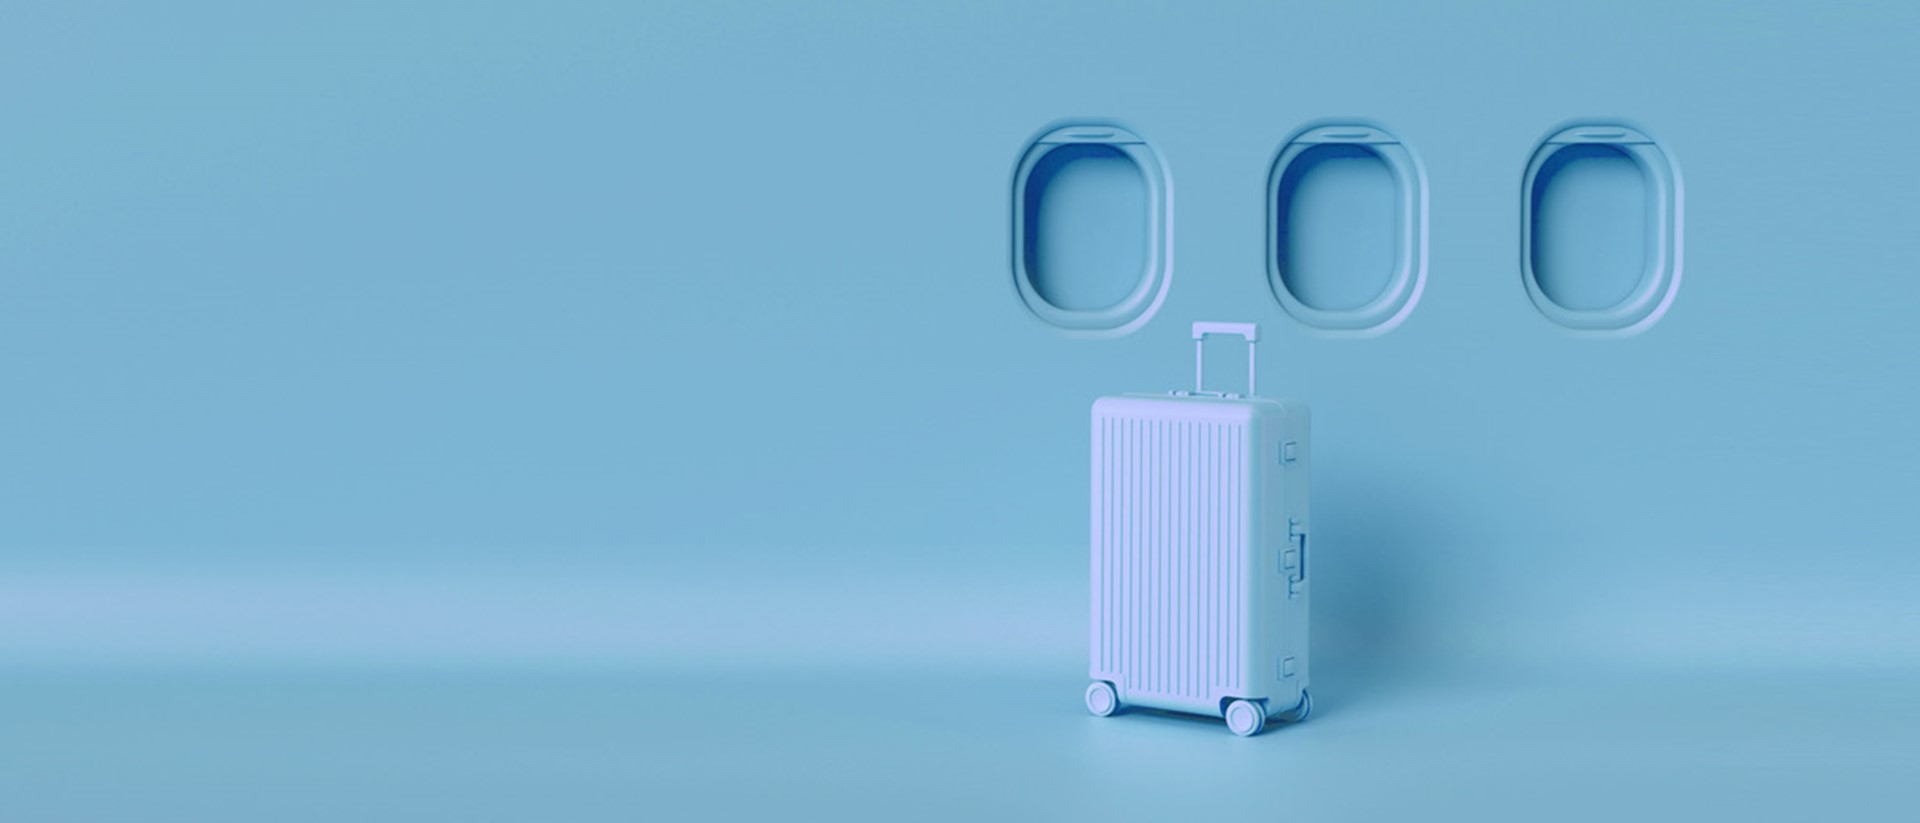 Image of a blue suitcase against a blue background